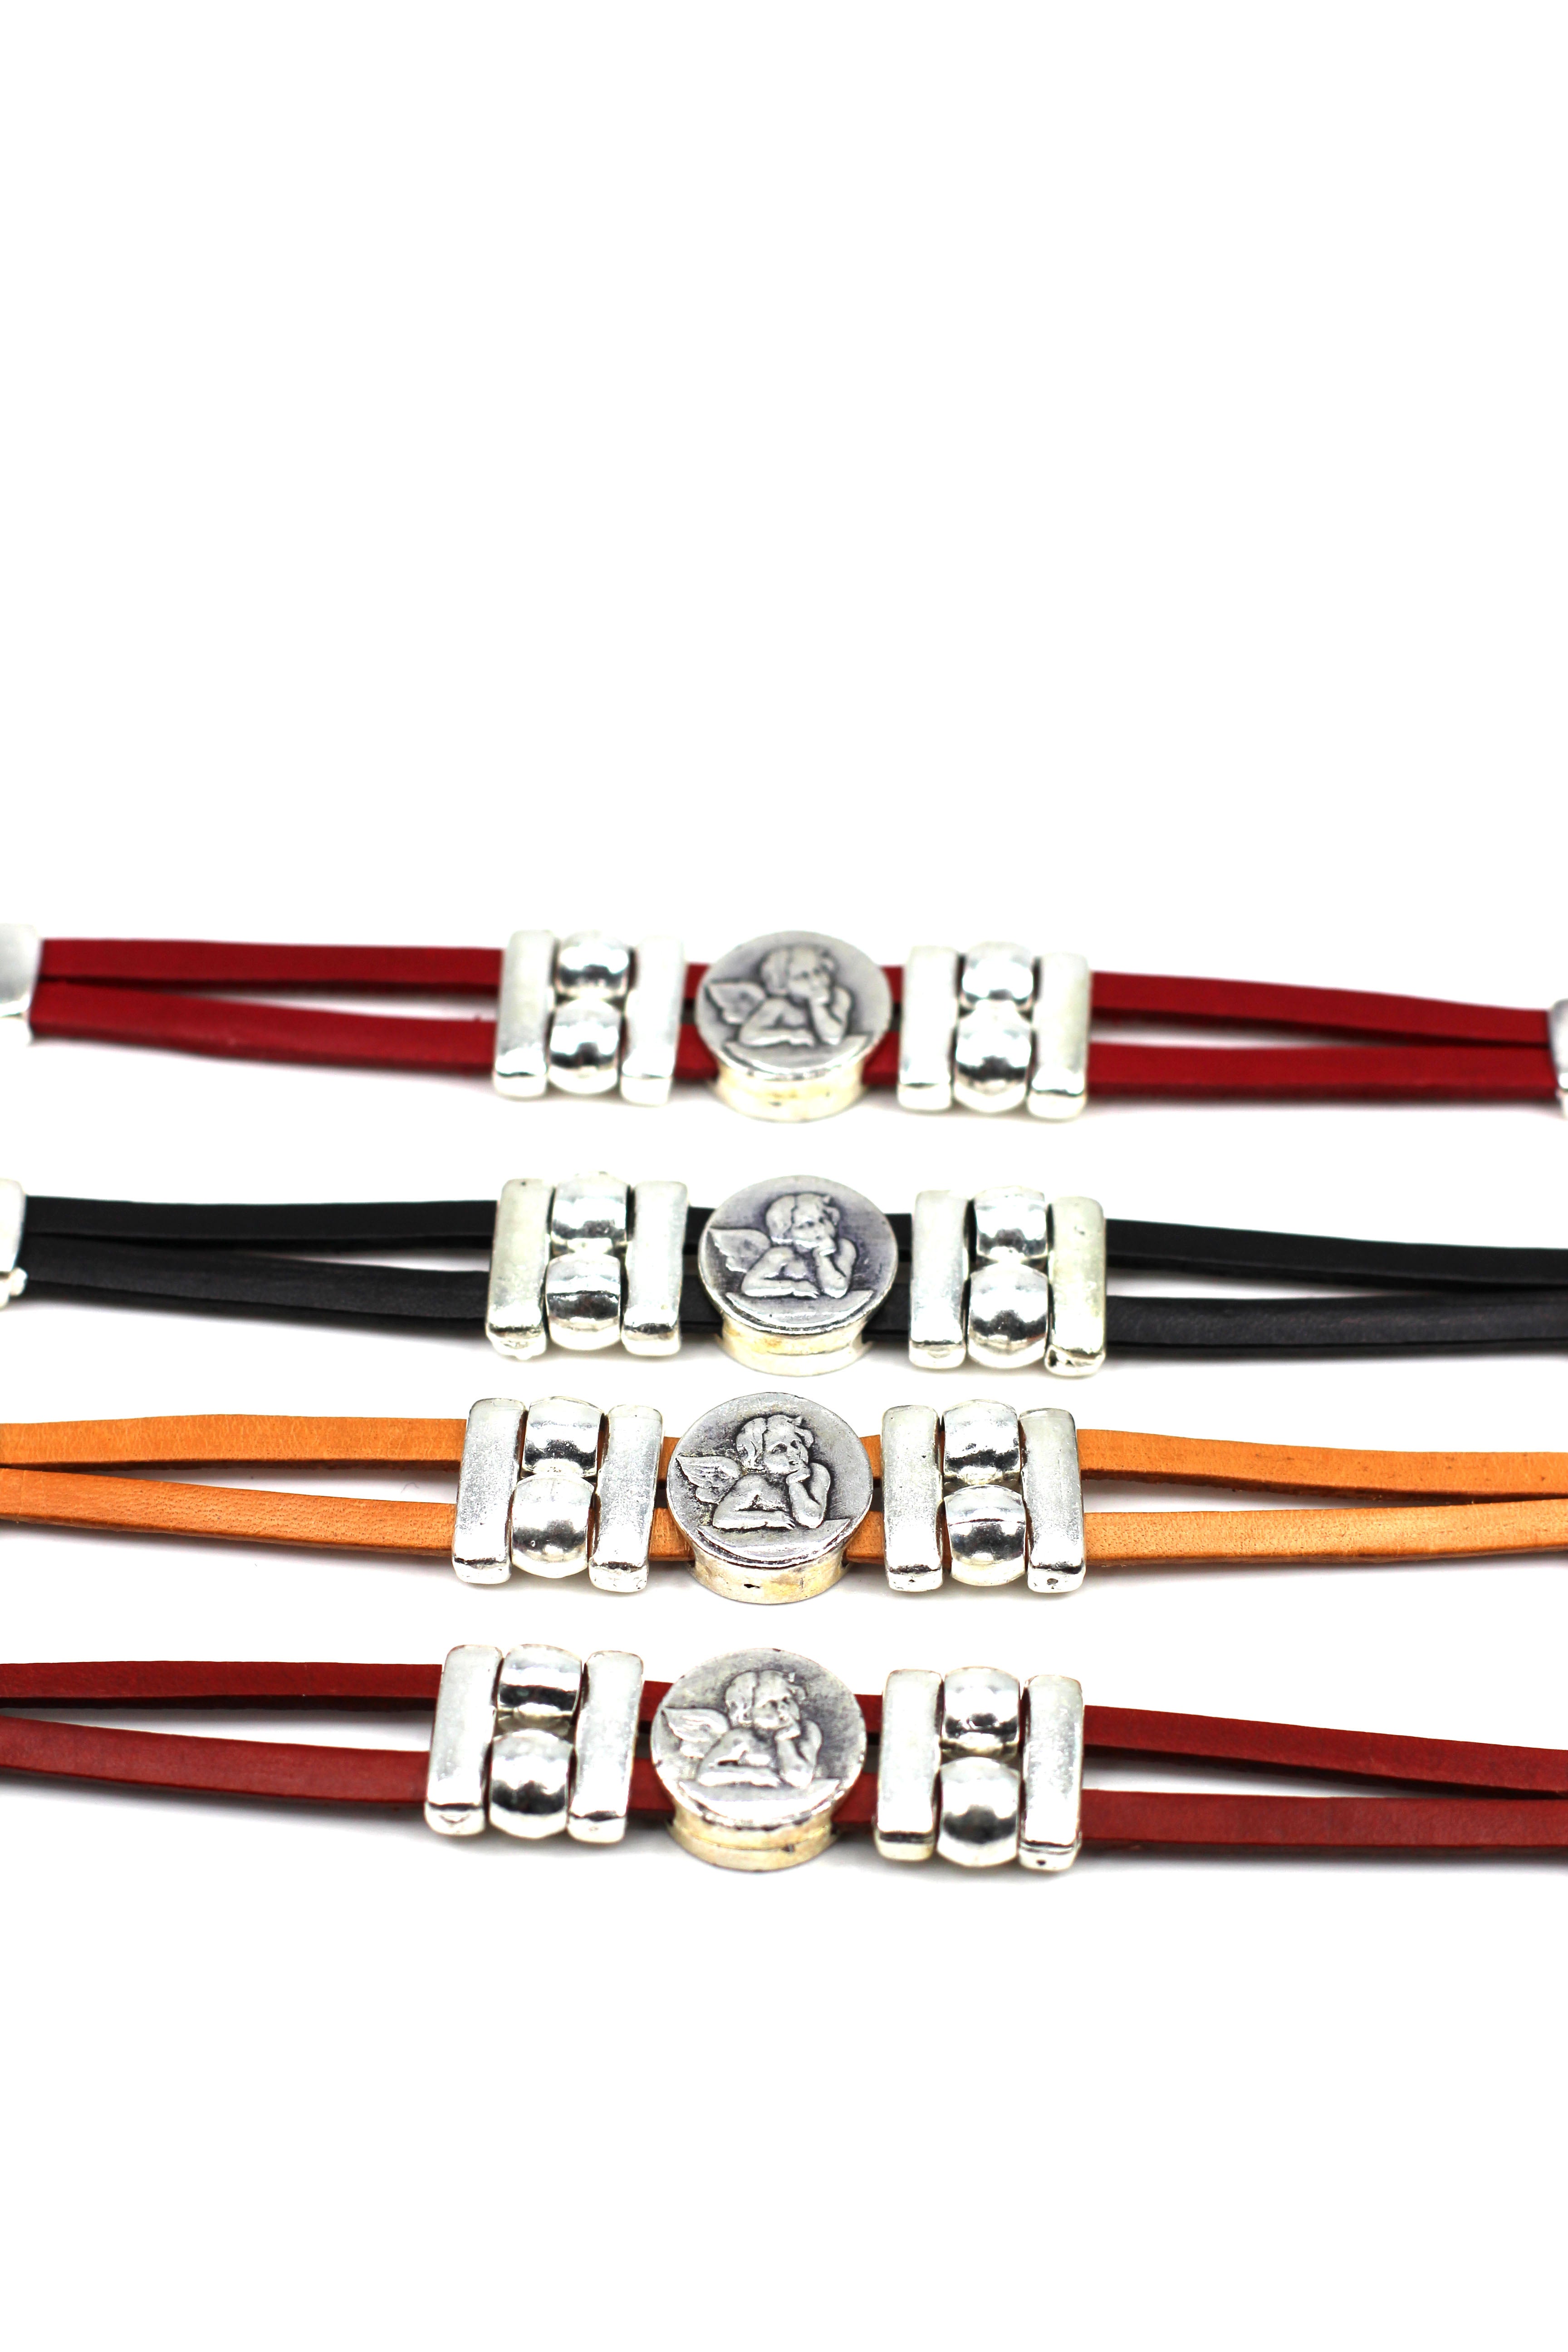 Bracelet of The Guardian Angel  handmade jewelry with Double Leather Straps by Graciela's Collection